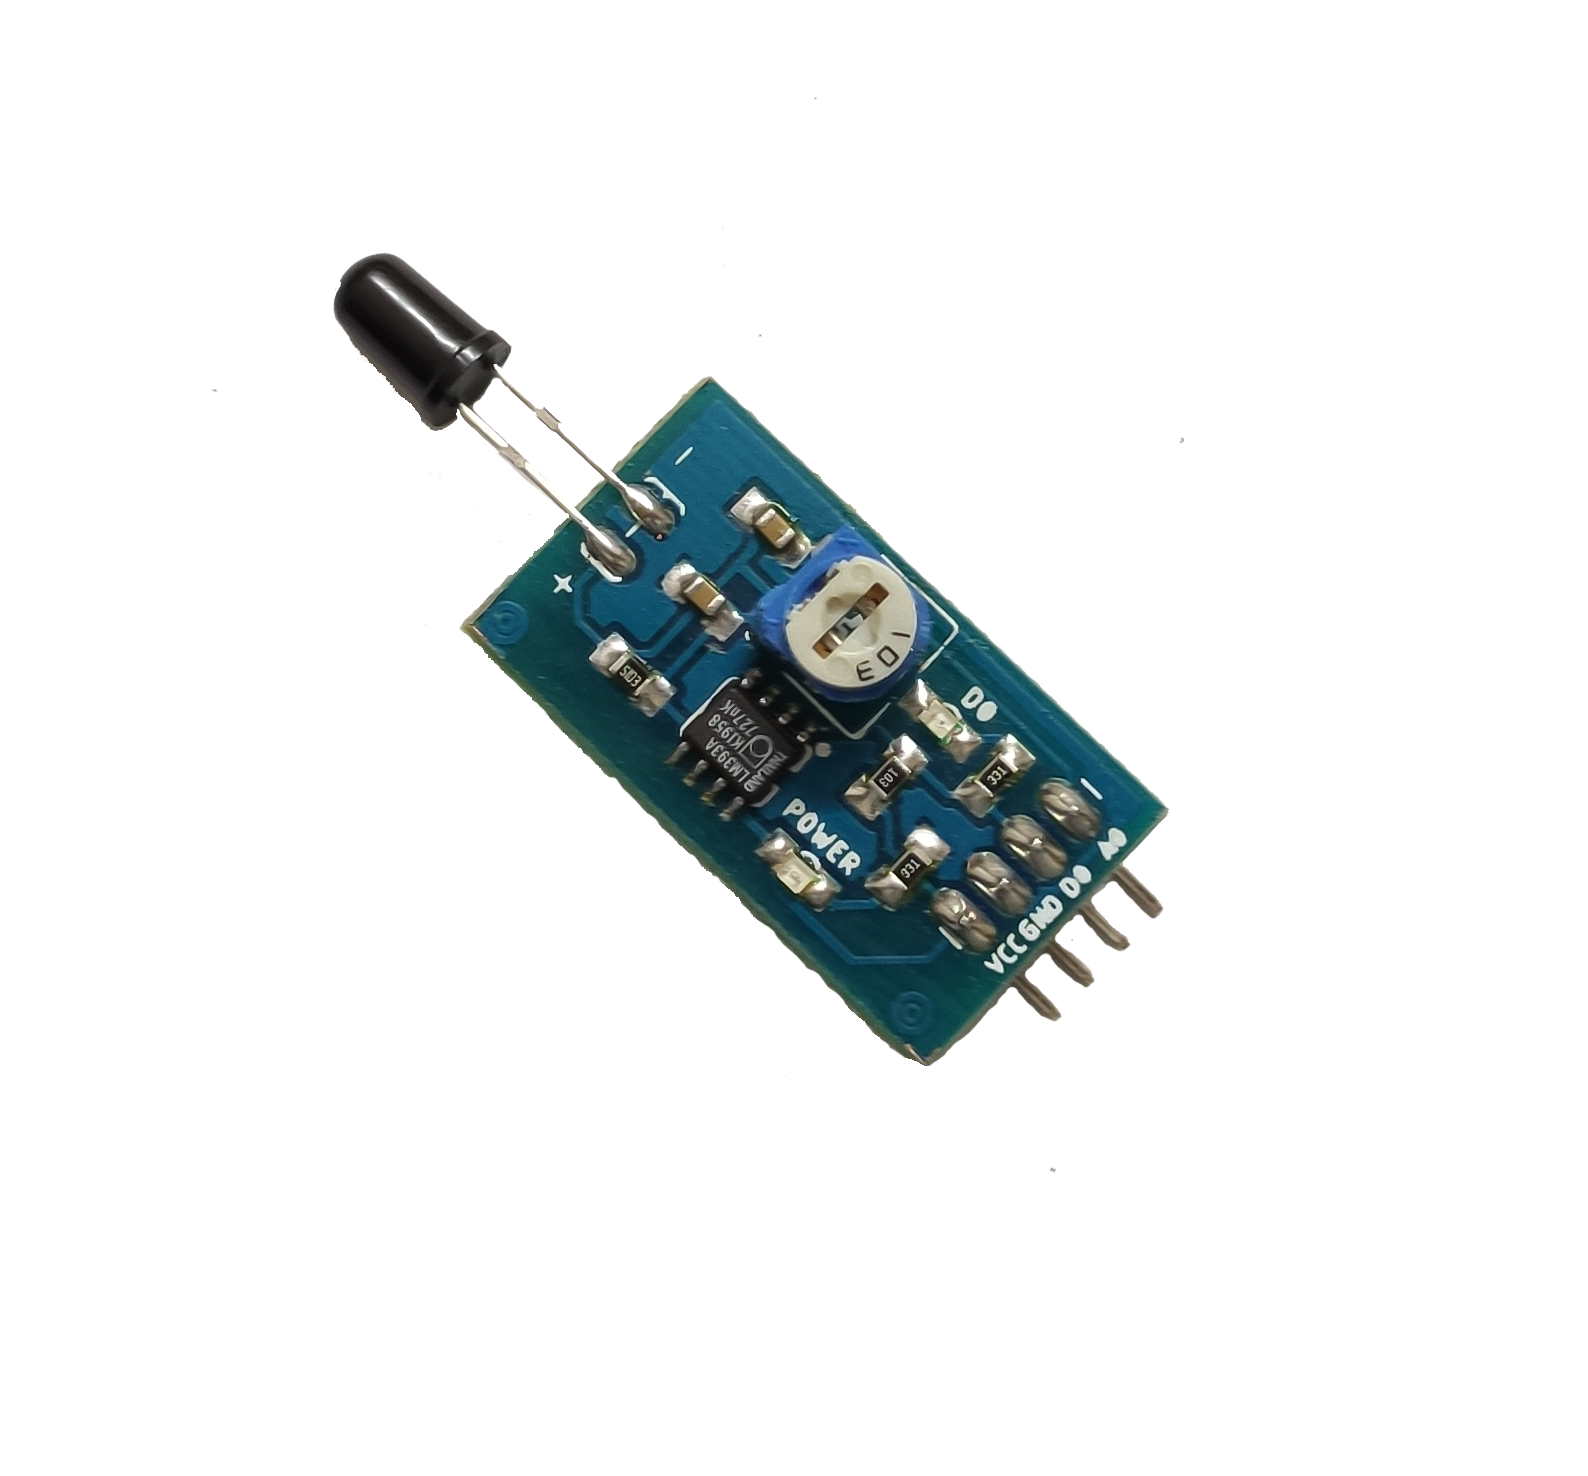  Flame Sensor Module With 3-Pin Wires 